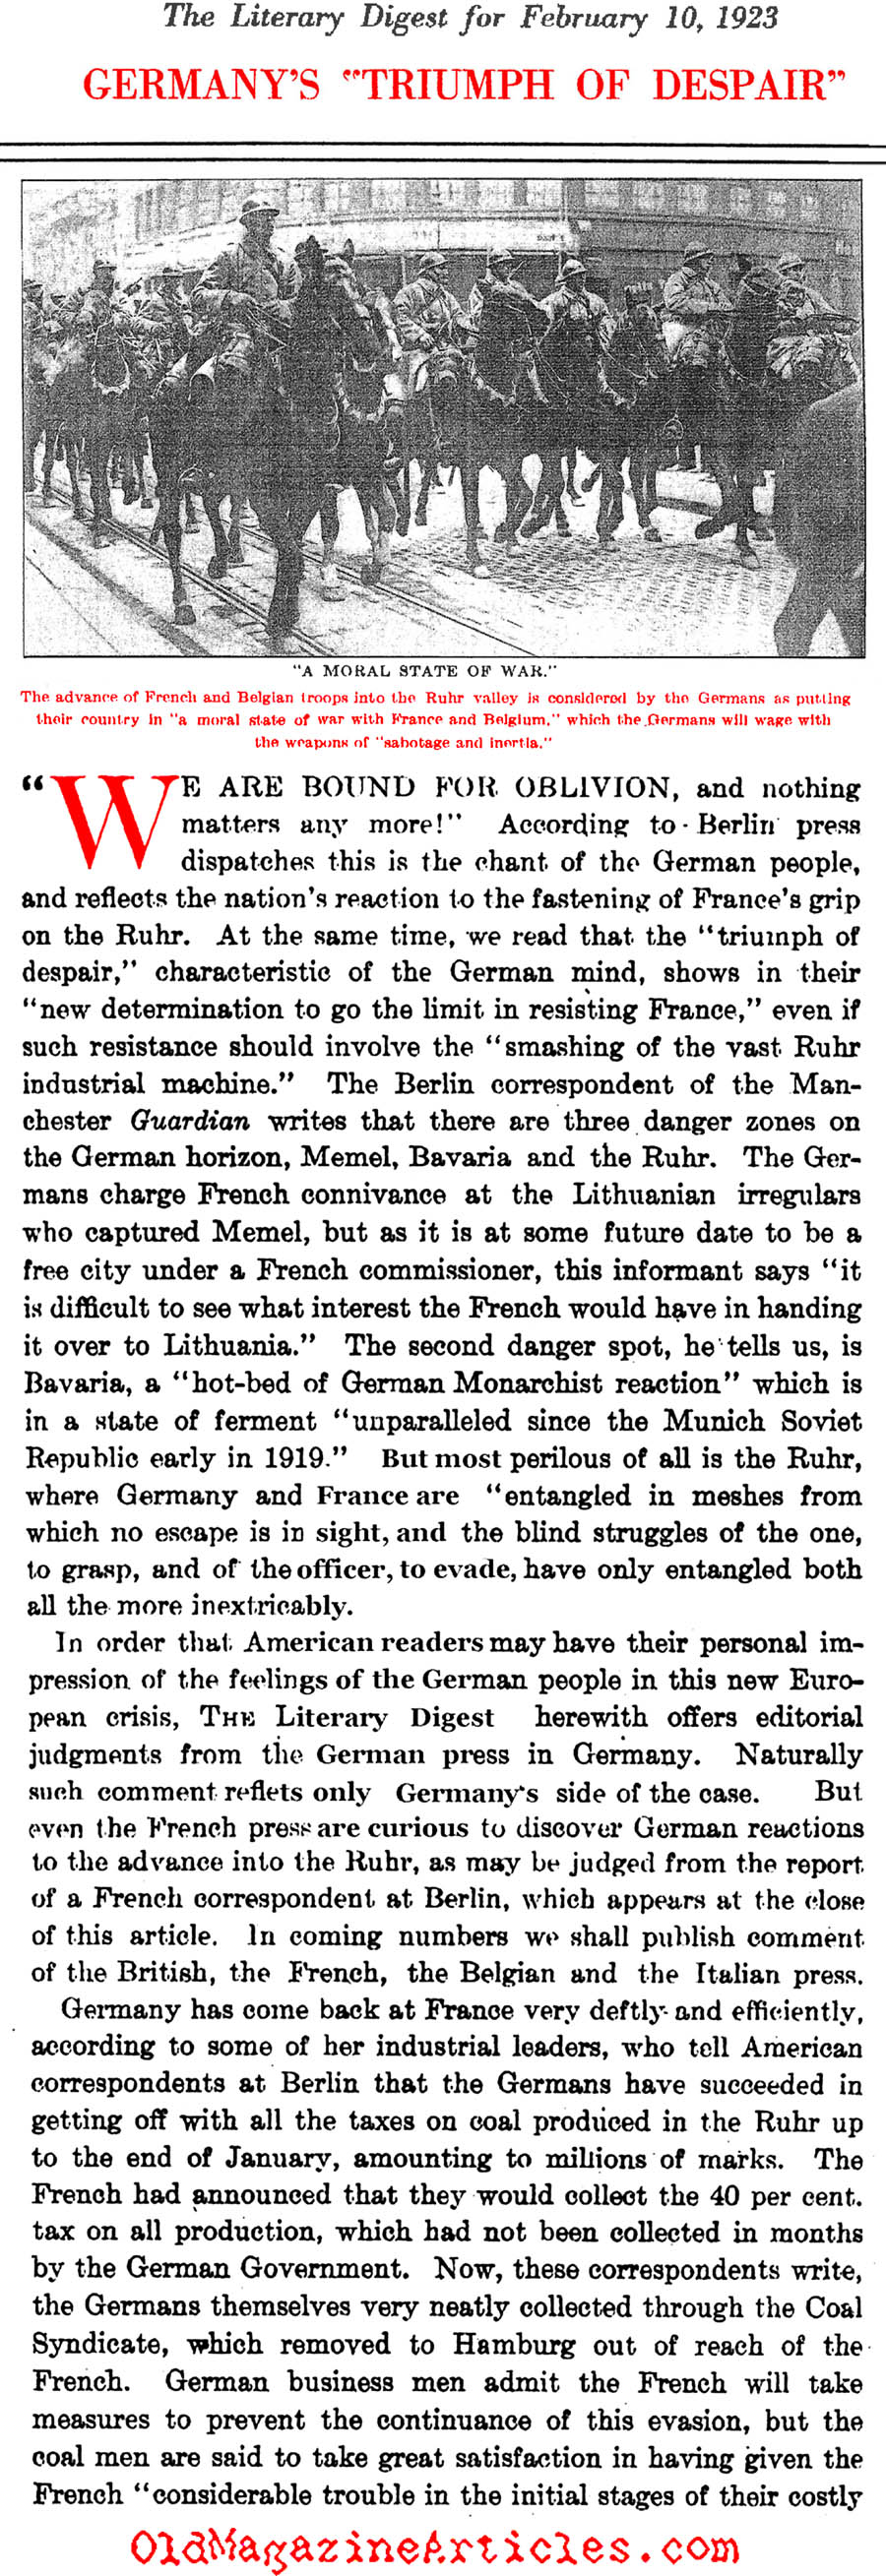 The French Army Moves into the Ruhr Valley (Literary Digest, 1923)